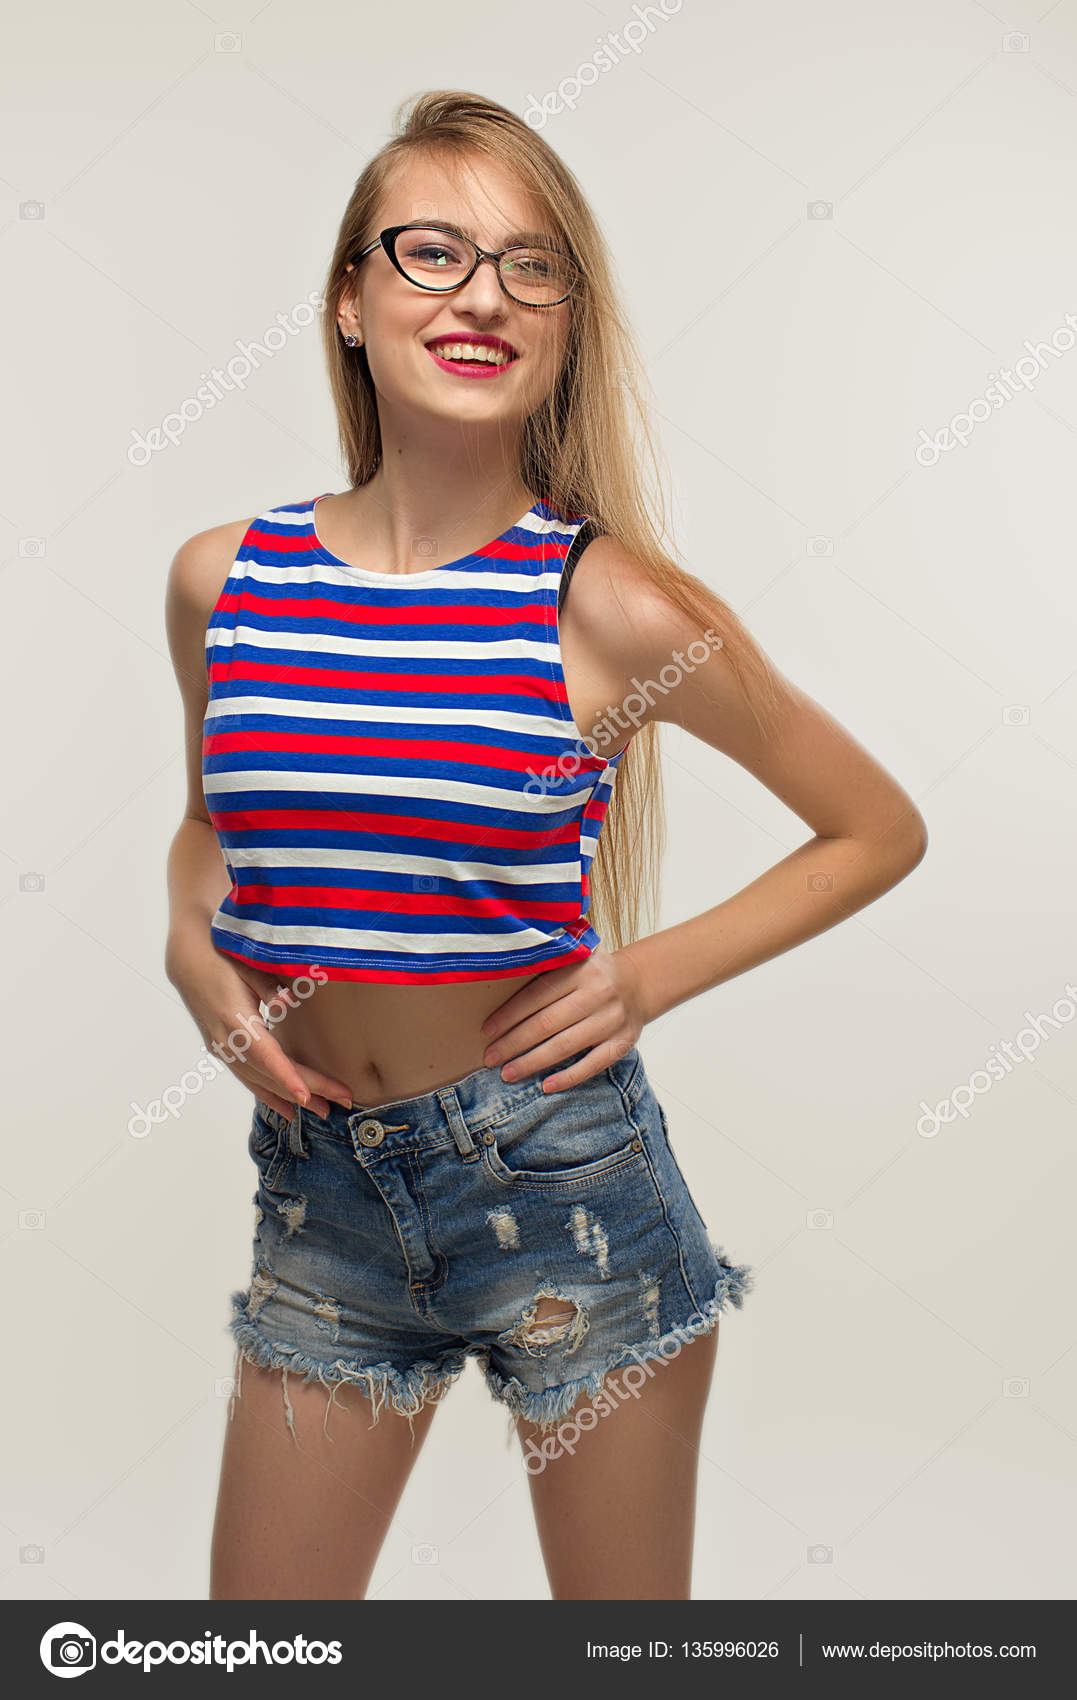 Beautiful Blonde Girl In Glasses And In Striped Top Jeans Shirt She Is Very Serious Female